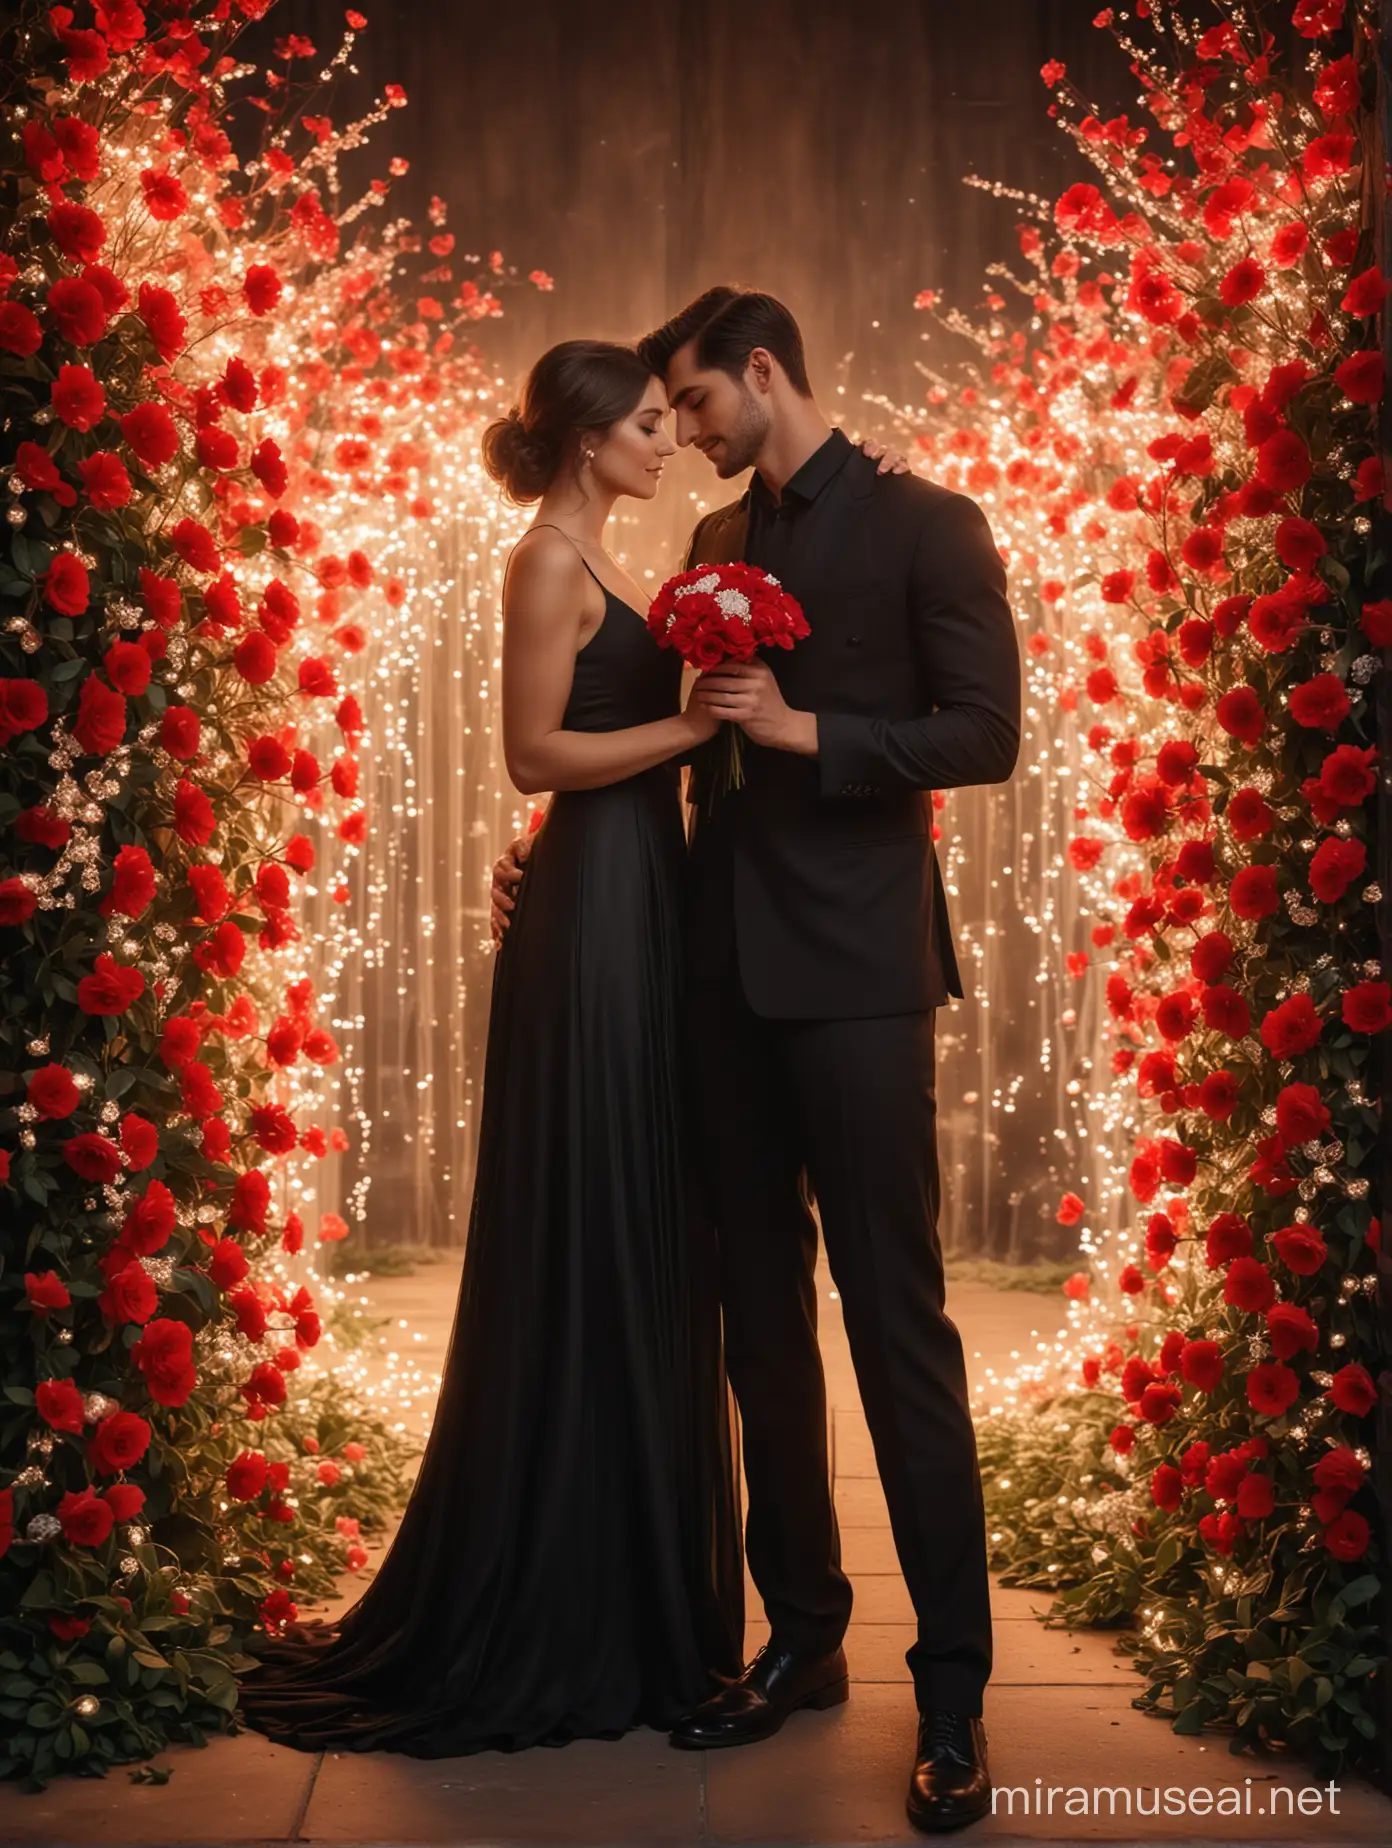 A beautiful lady in a black fitted dress, held romantically by a handsome young man, standing near a sparkling red and white glowing flower